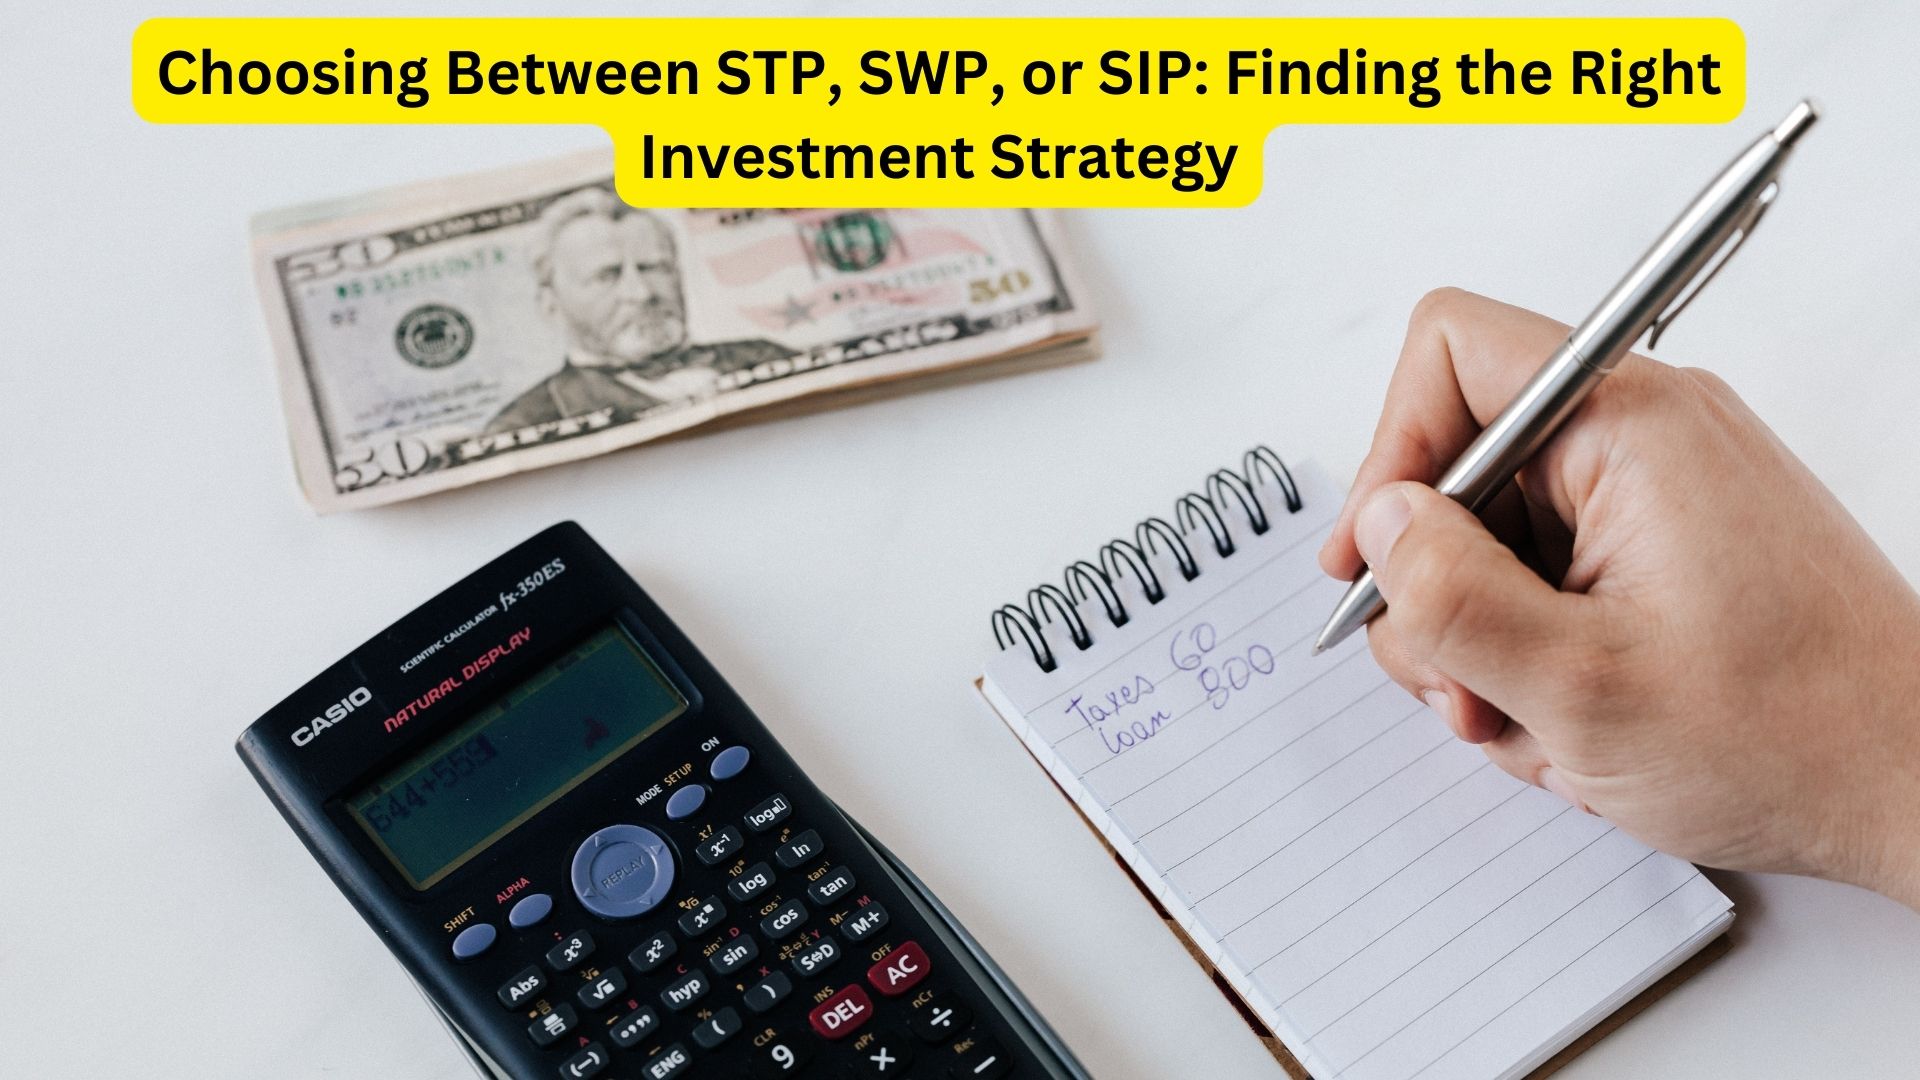 Choosing Between STP, SWP, or SIP: Finding the Right Investment Strategy